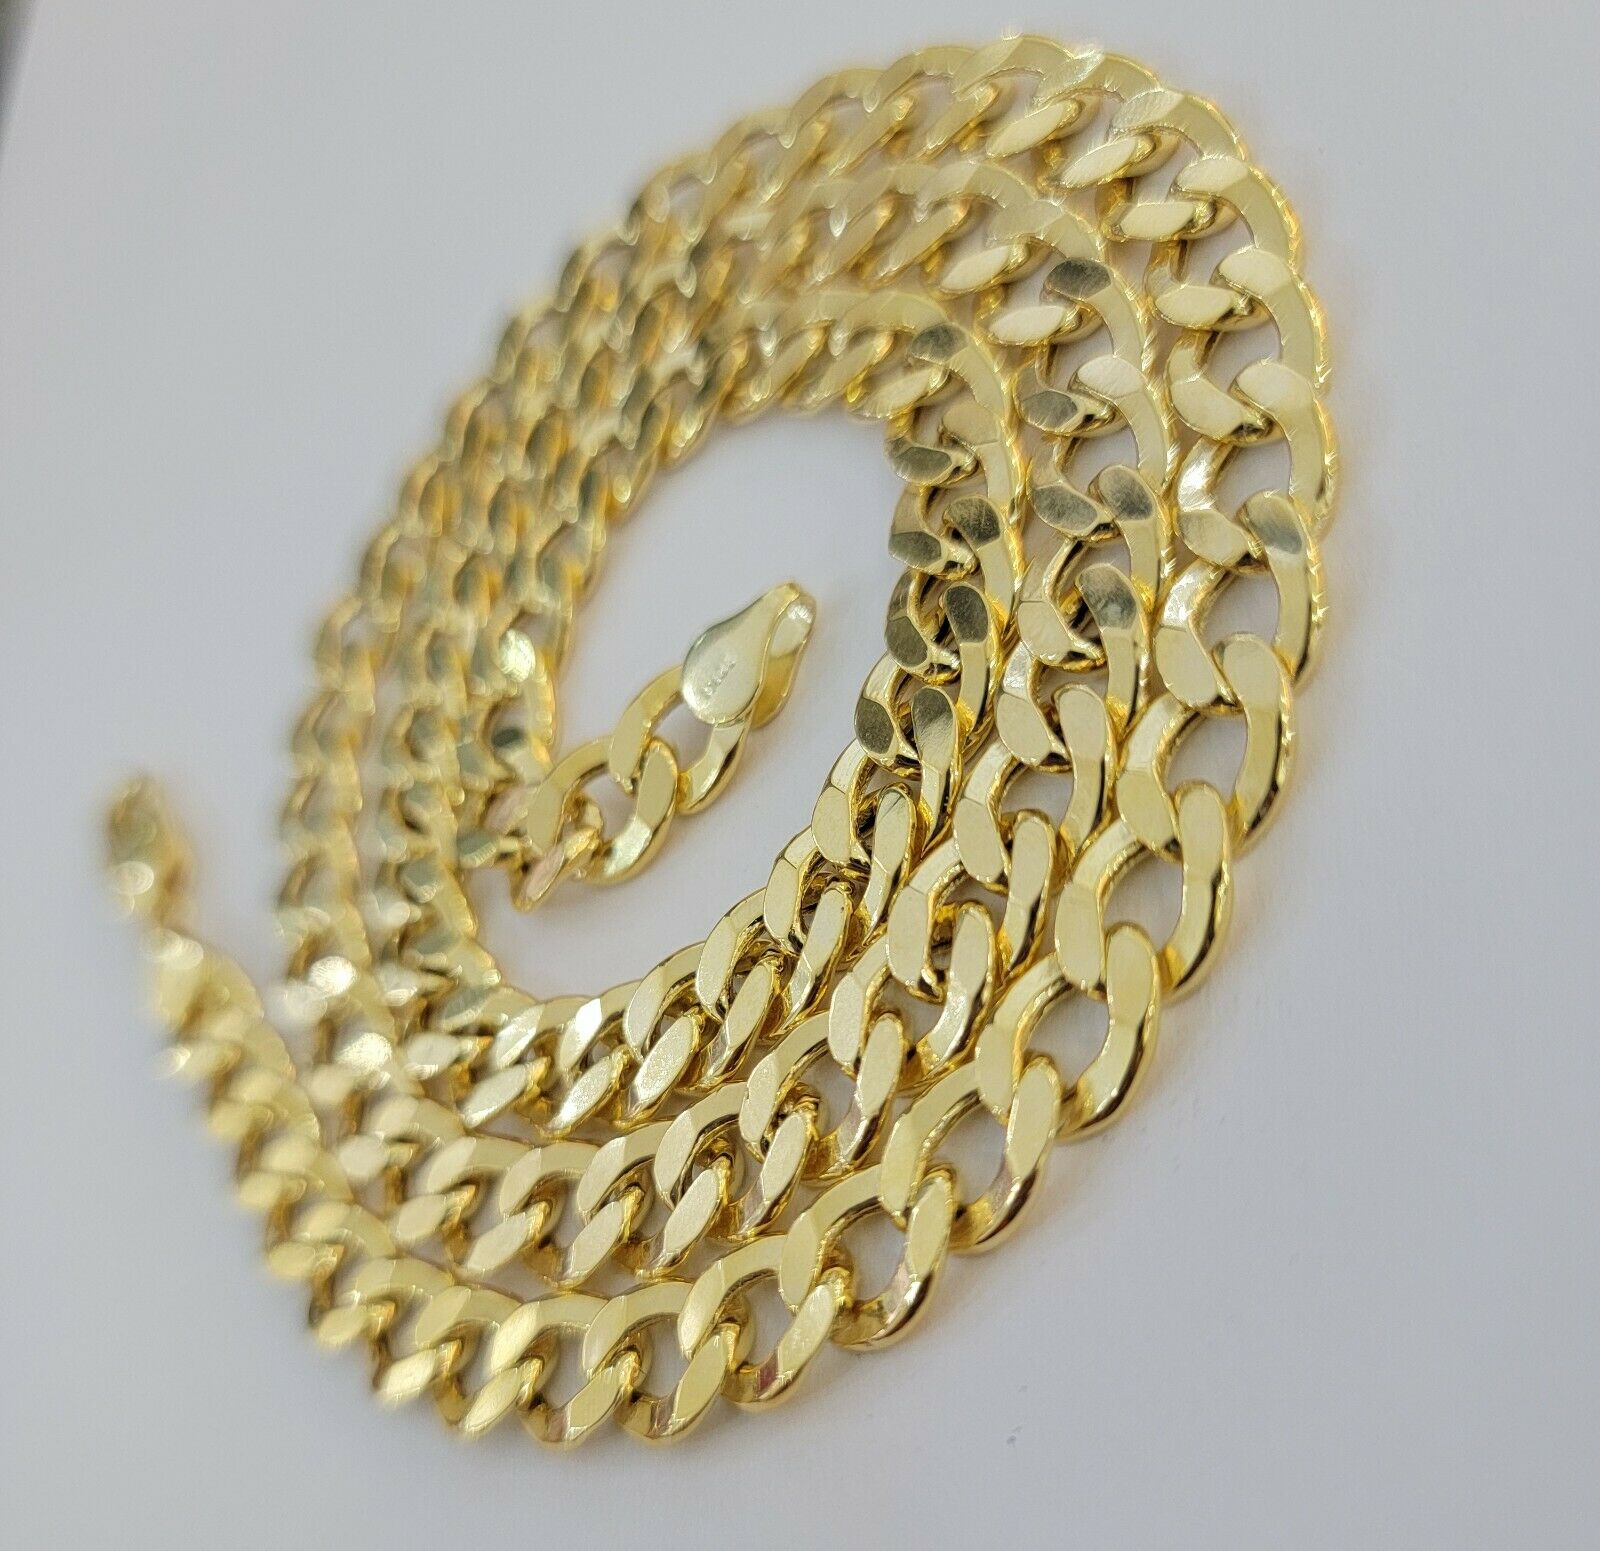 10kt Yellow Gold Chain 8mm Cuban Curb Link Necklace 26"Inch Strong Link REAL 10k